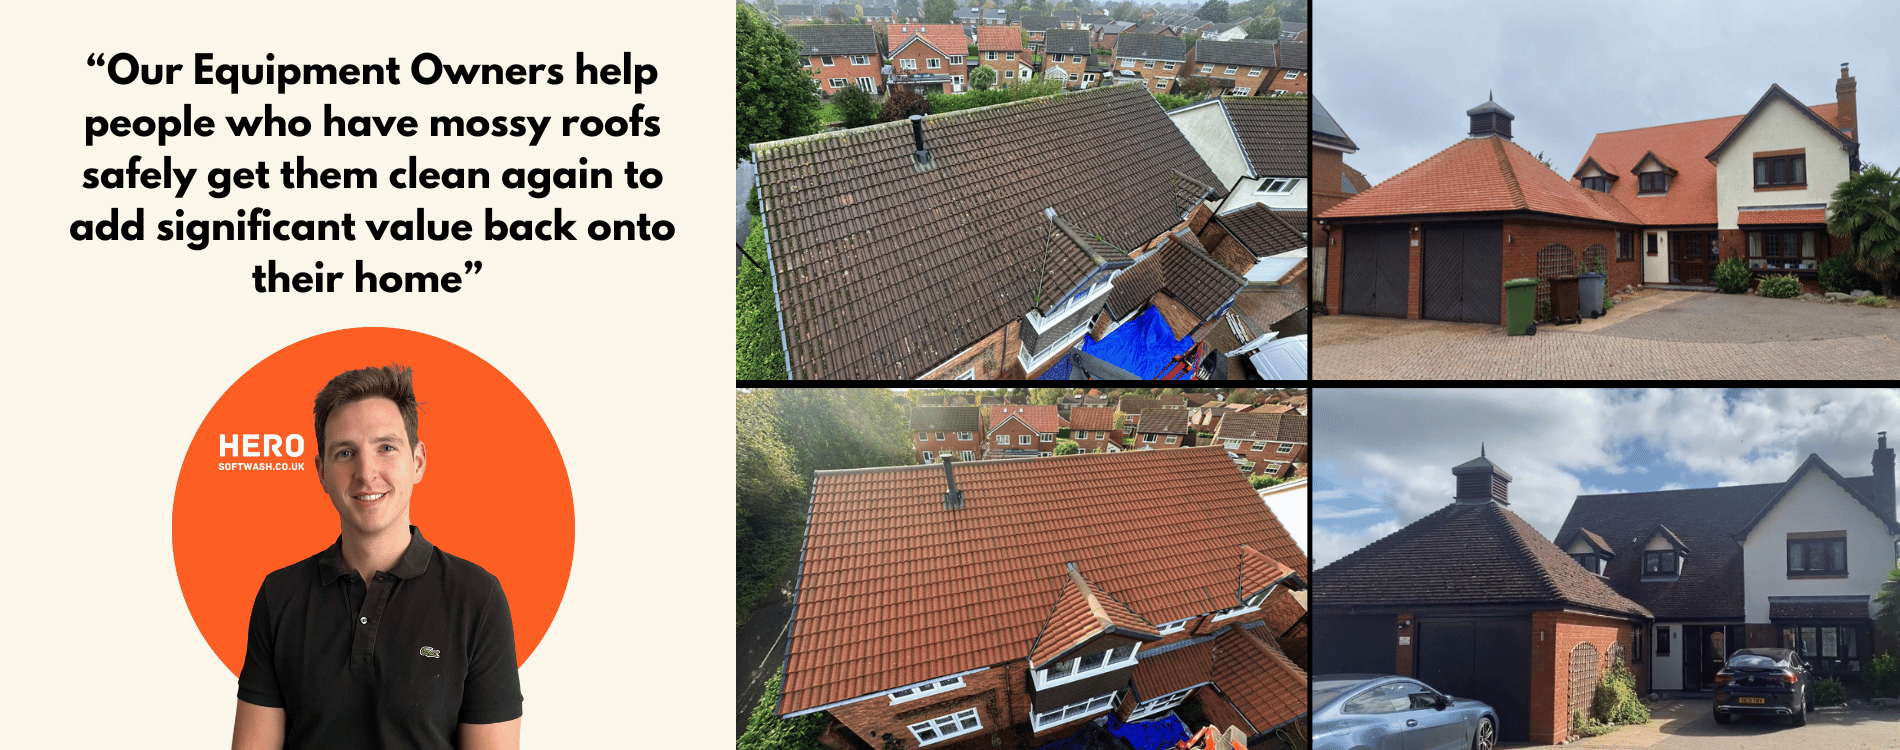 Professional roof cleaning and moss removal service in Jersey, UK